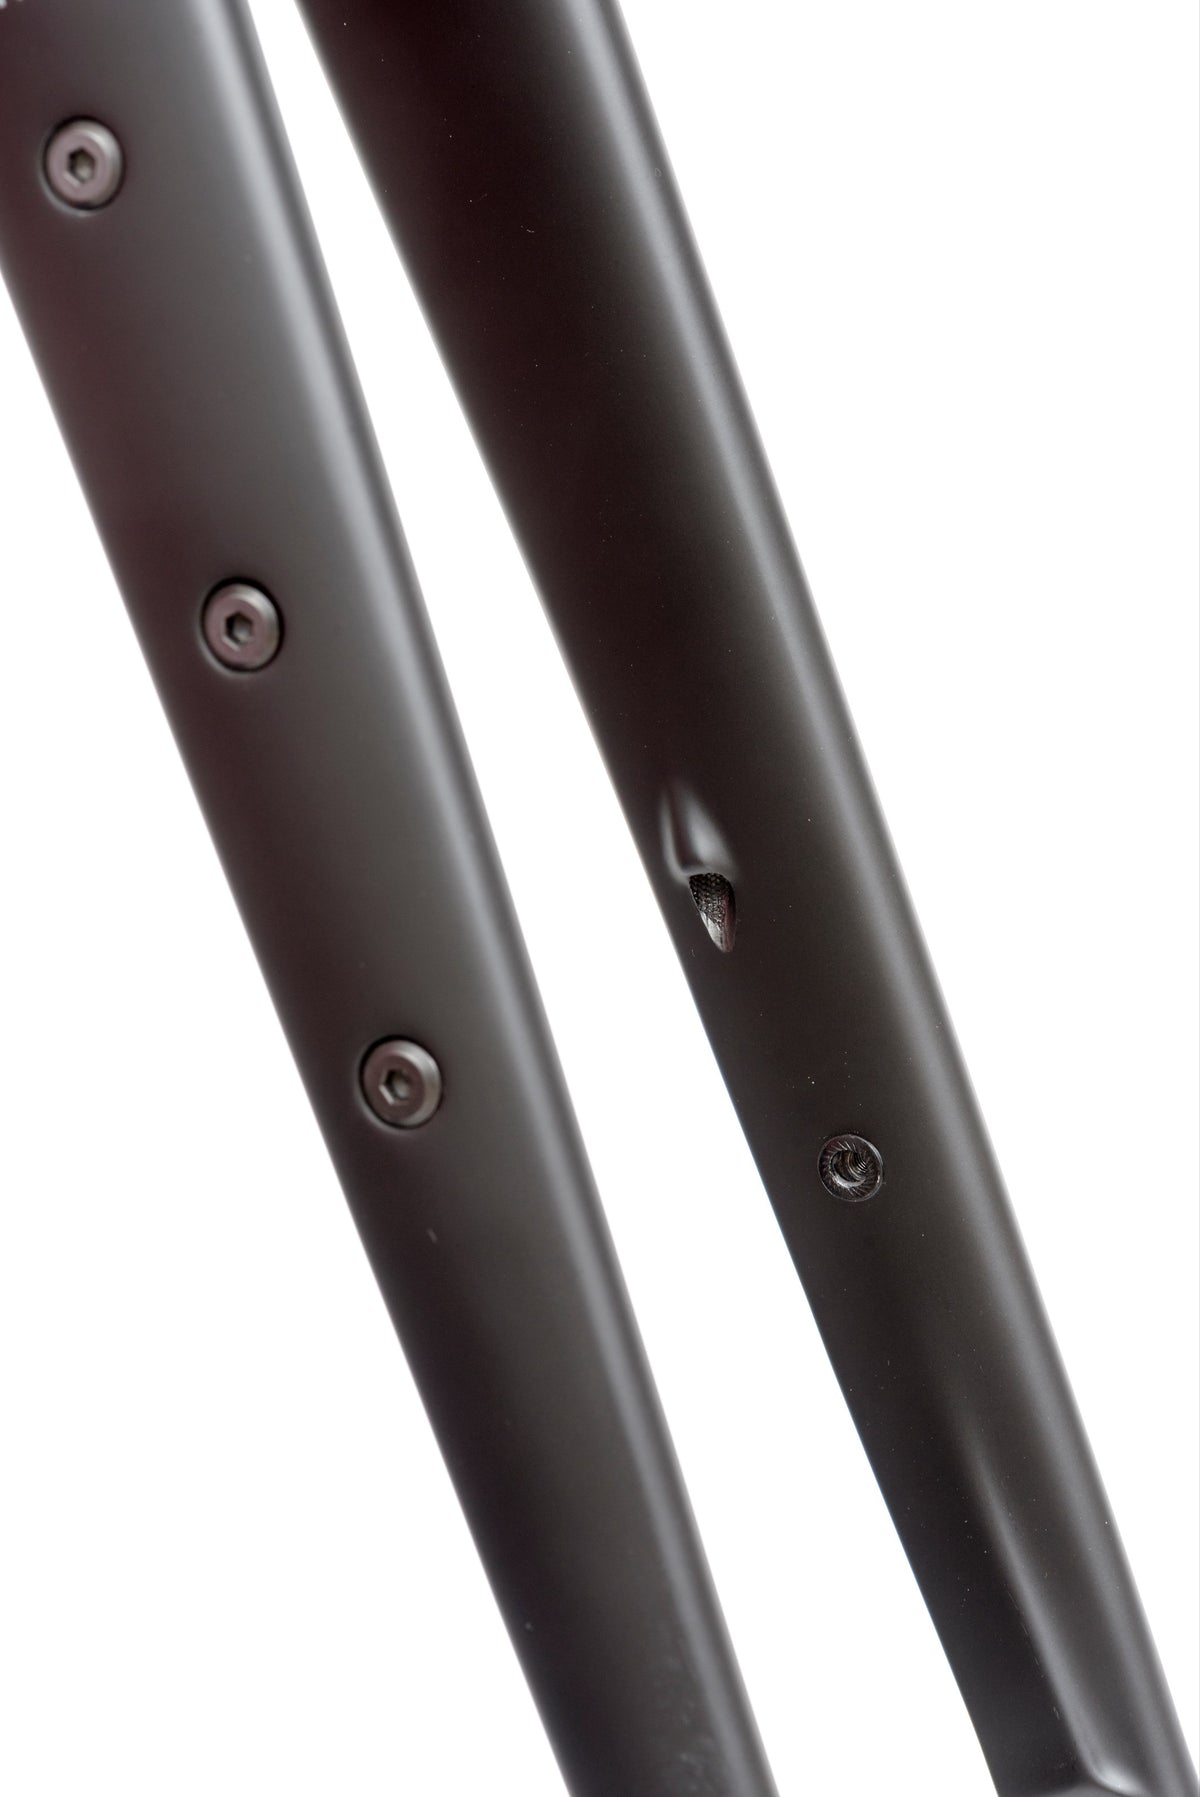 close up of Reilly carbon adventure fork against white background showing mount fixings